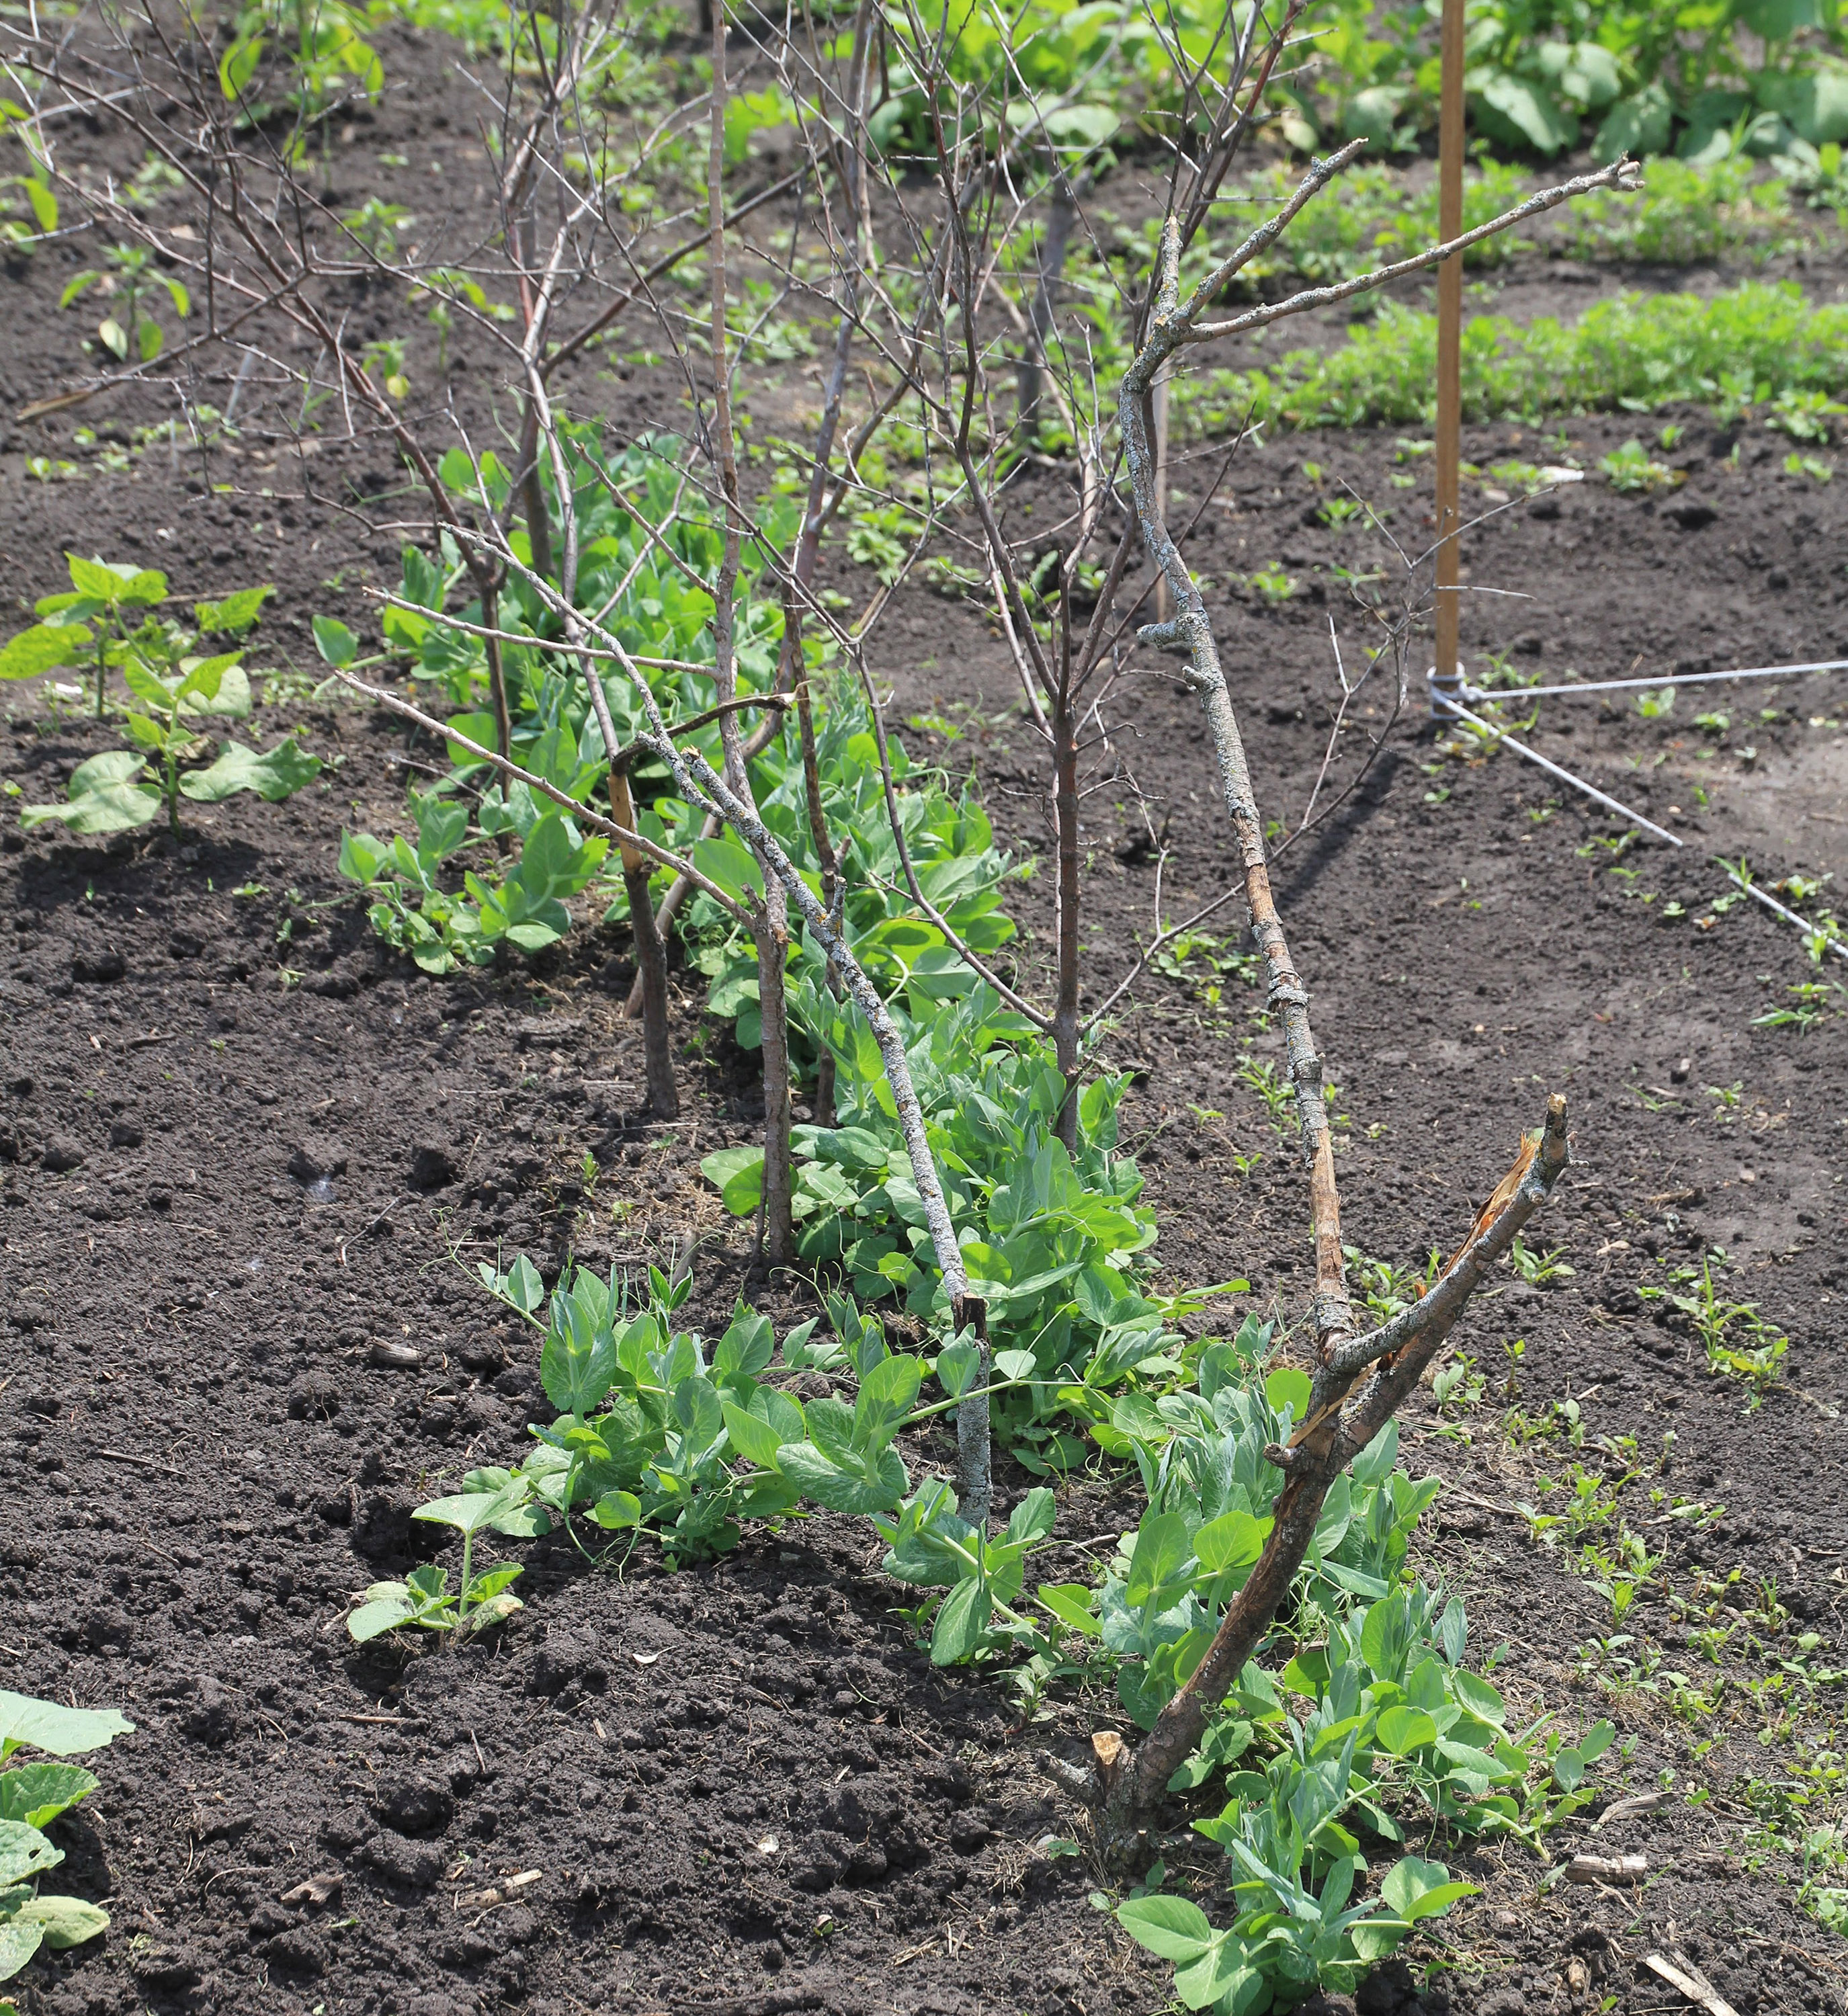 pea plants growing up several dead tree branches staked in garden soil